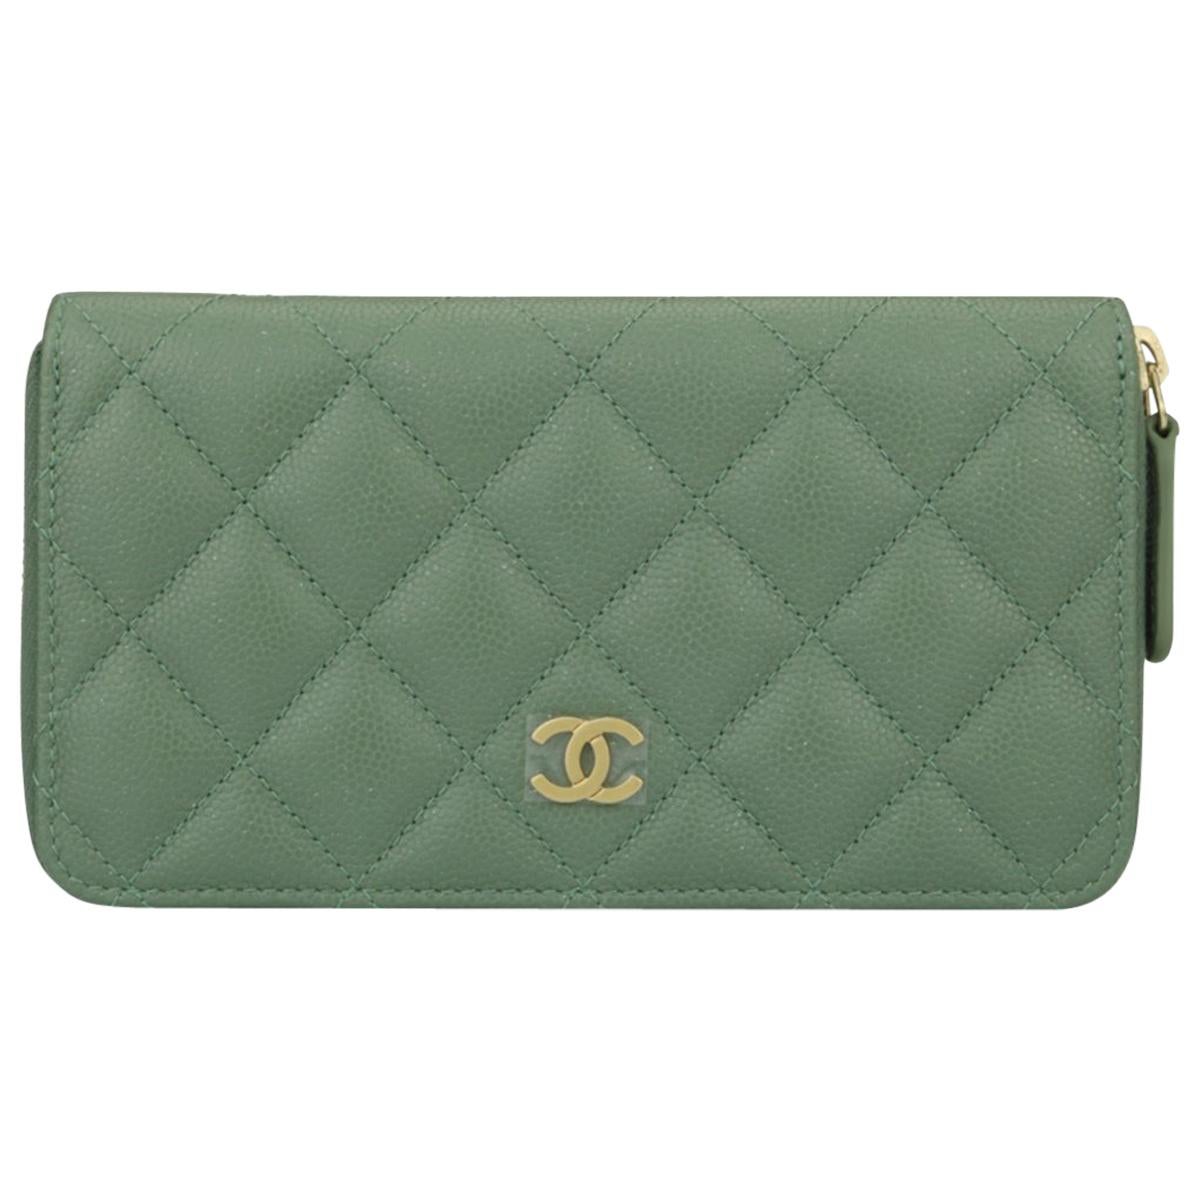 CHANEL Classic Zipped Wallet Medium Green Caviar Iridescent with Brushed Gold HW